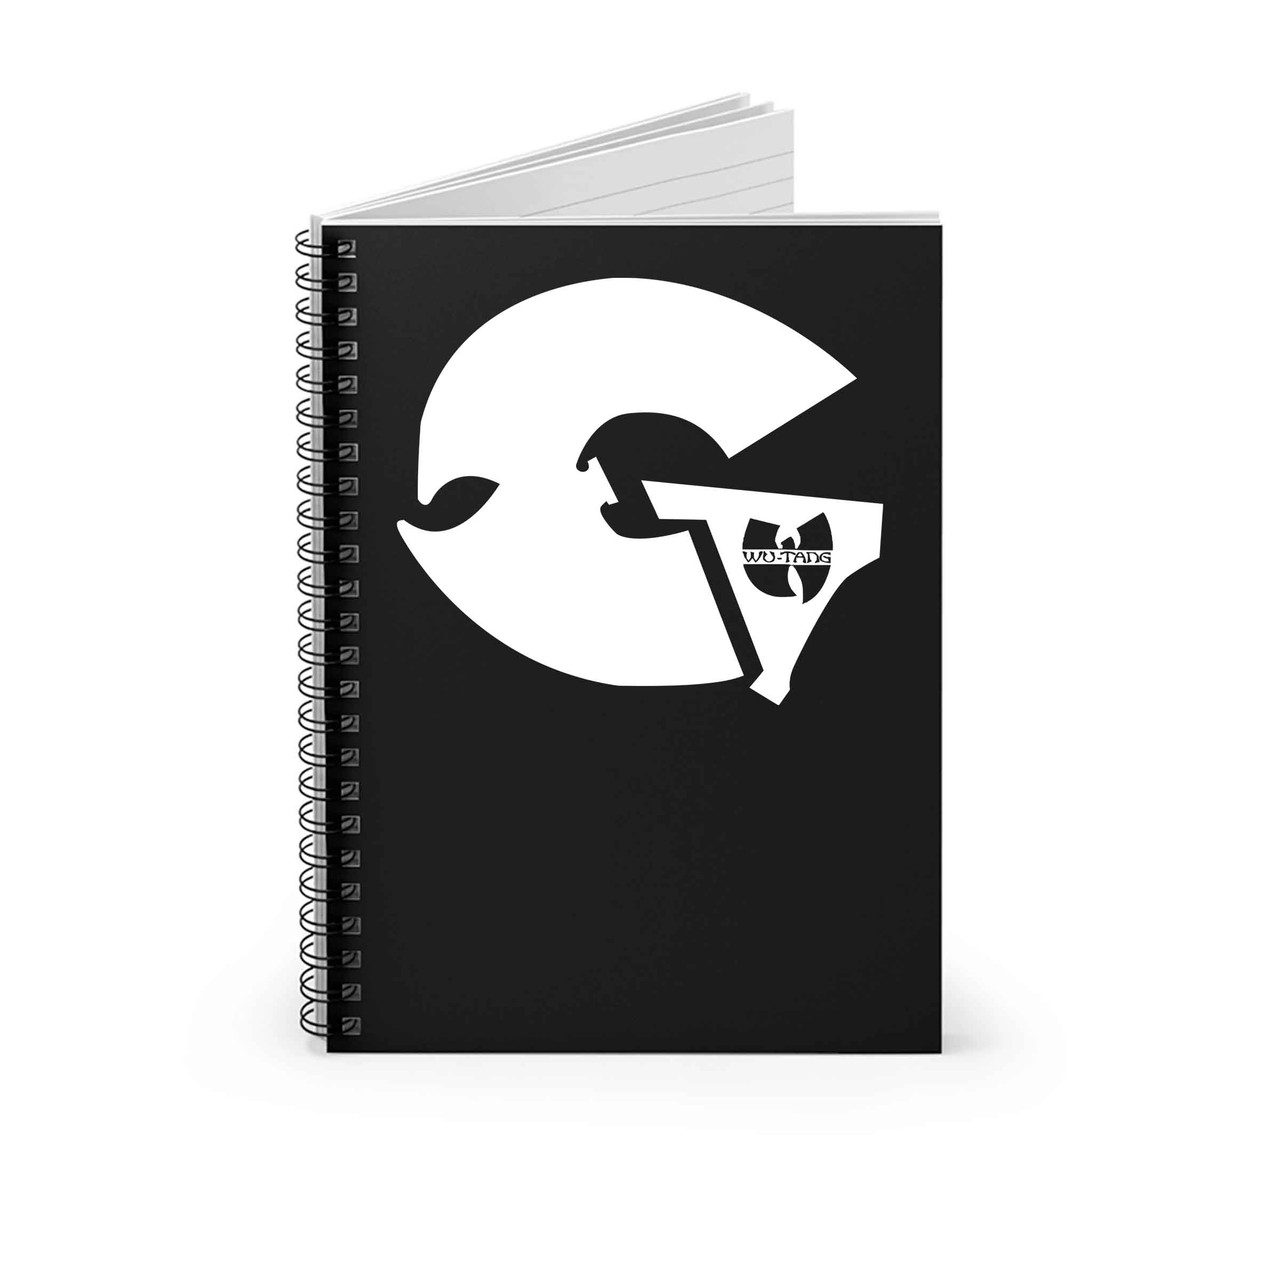 Gza Logo Classic Hip Hop Rap Vintage Style Wu Tang Clan Spiral Notebook